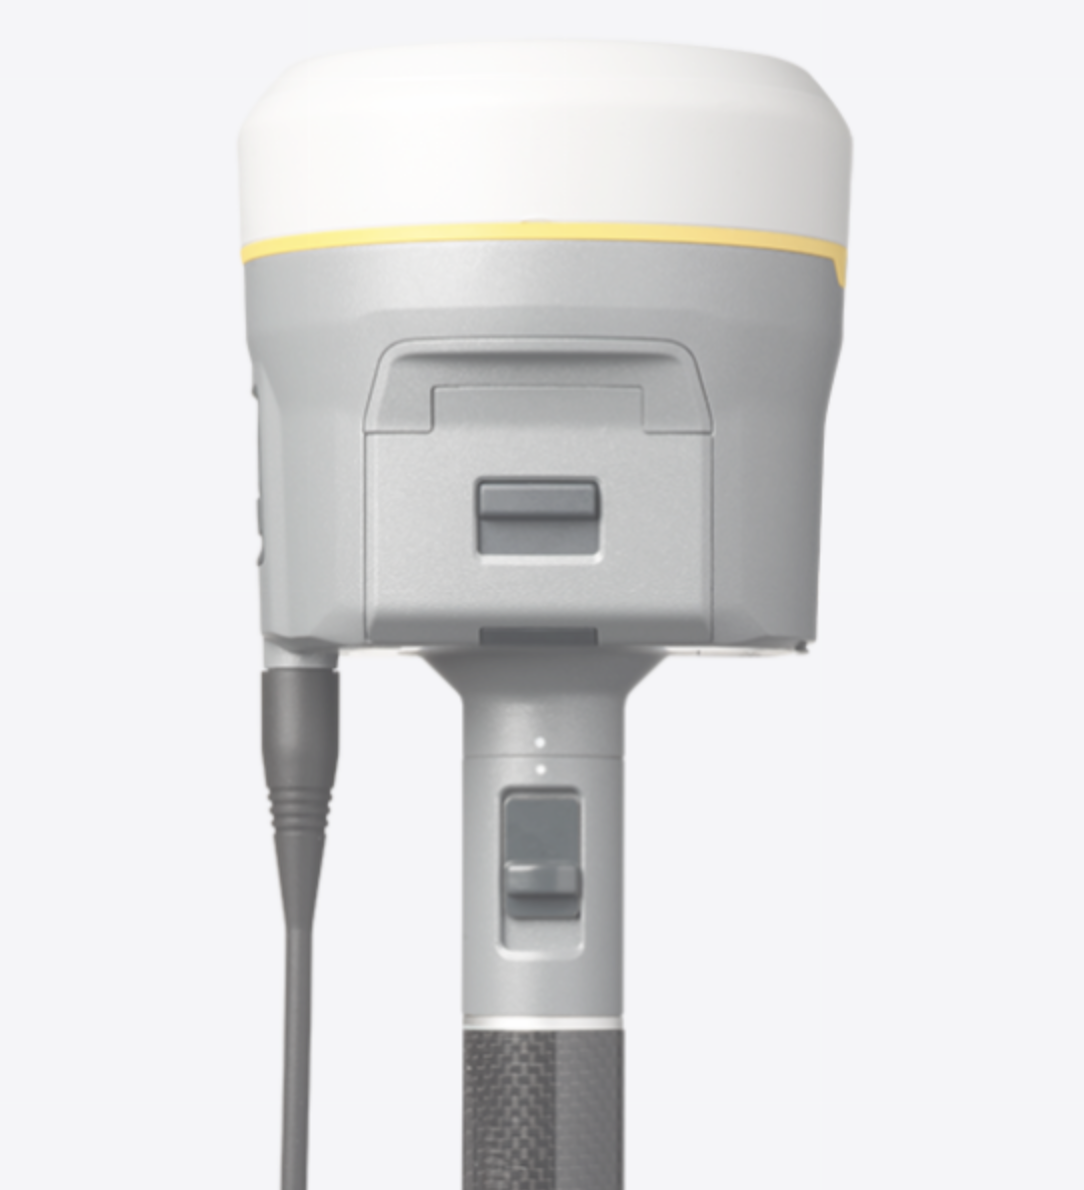 Trimble Launches New Model of R10 GNSS System for Land Surveyors